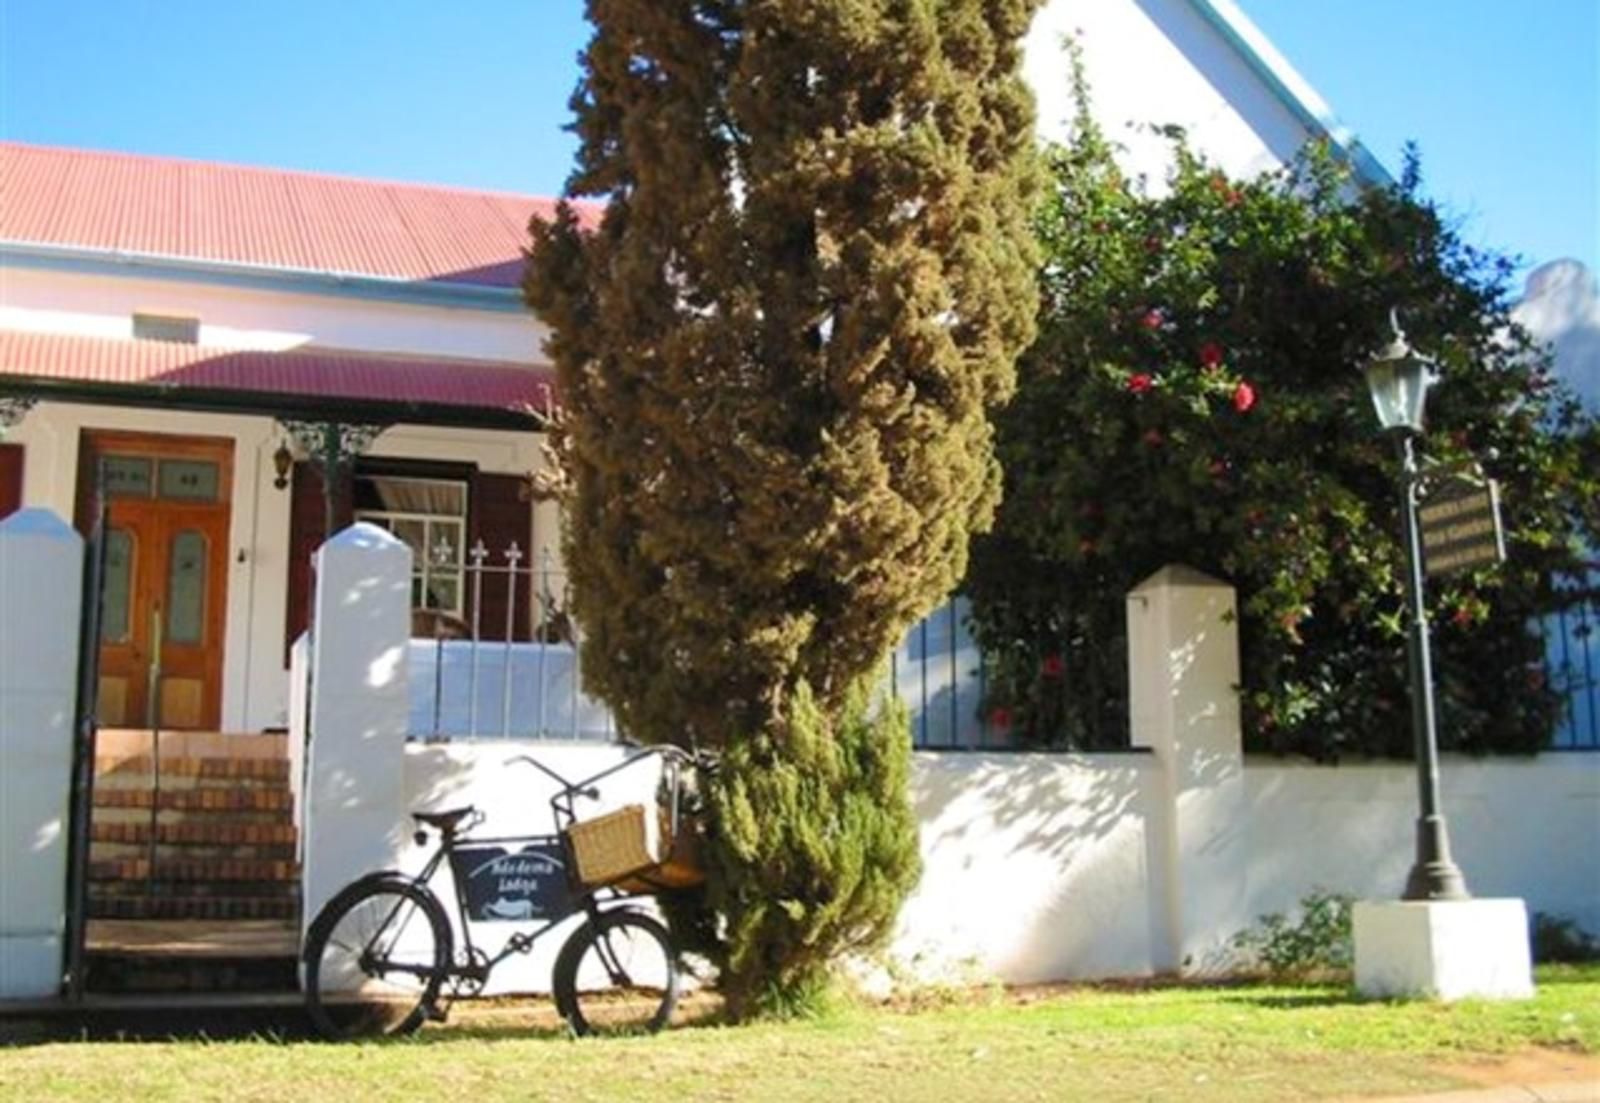 Ndedema Lodge Clanwilliam Western Cape South Africa House, Building, Architecture, Bicycle, Vehicle